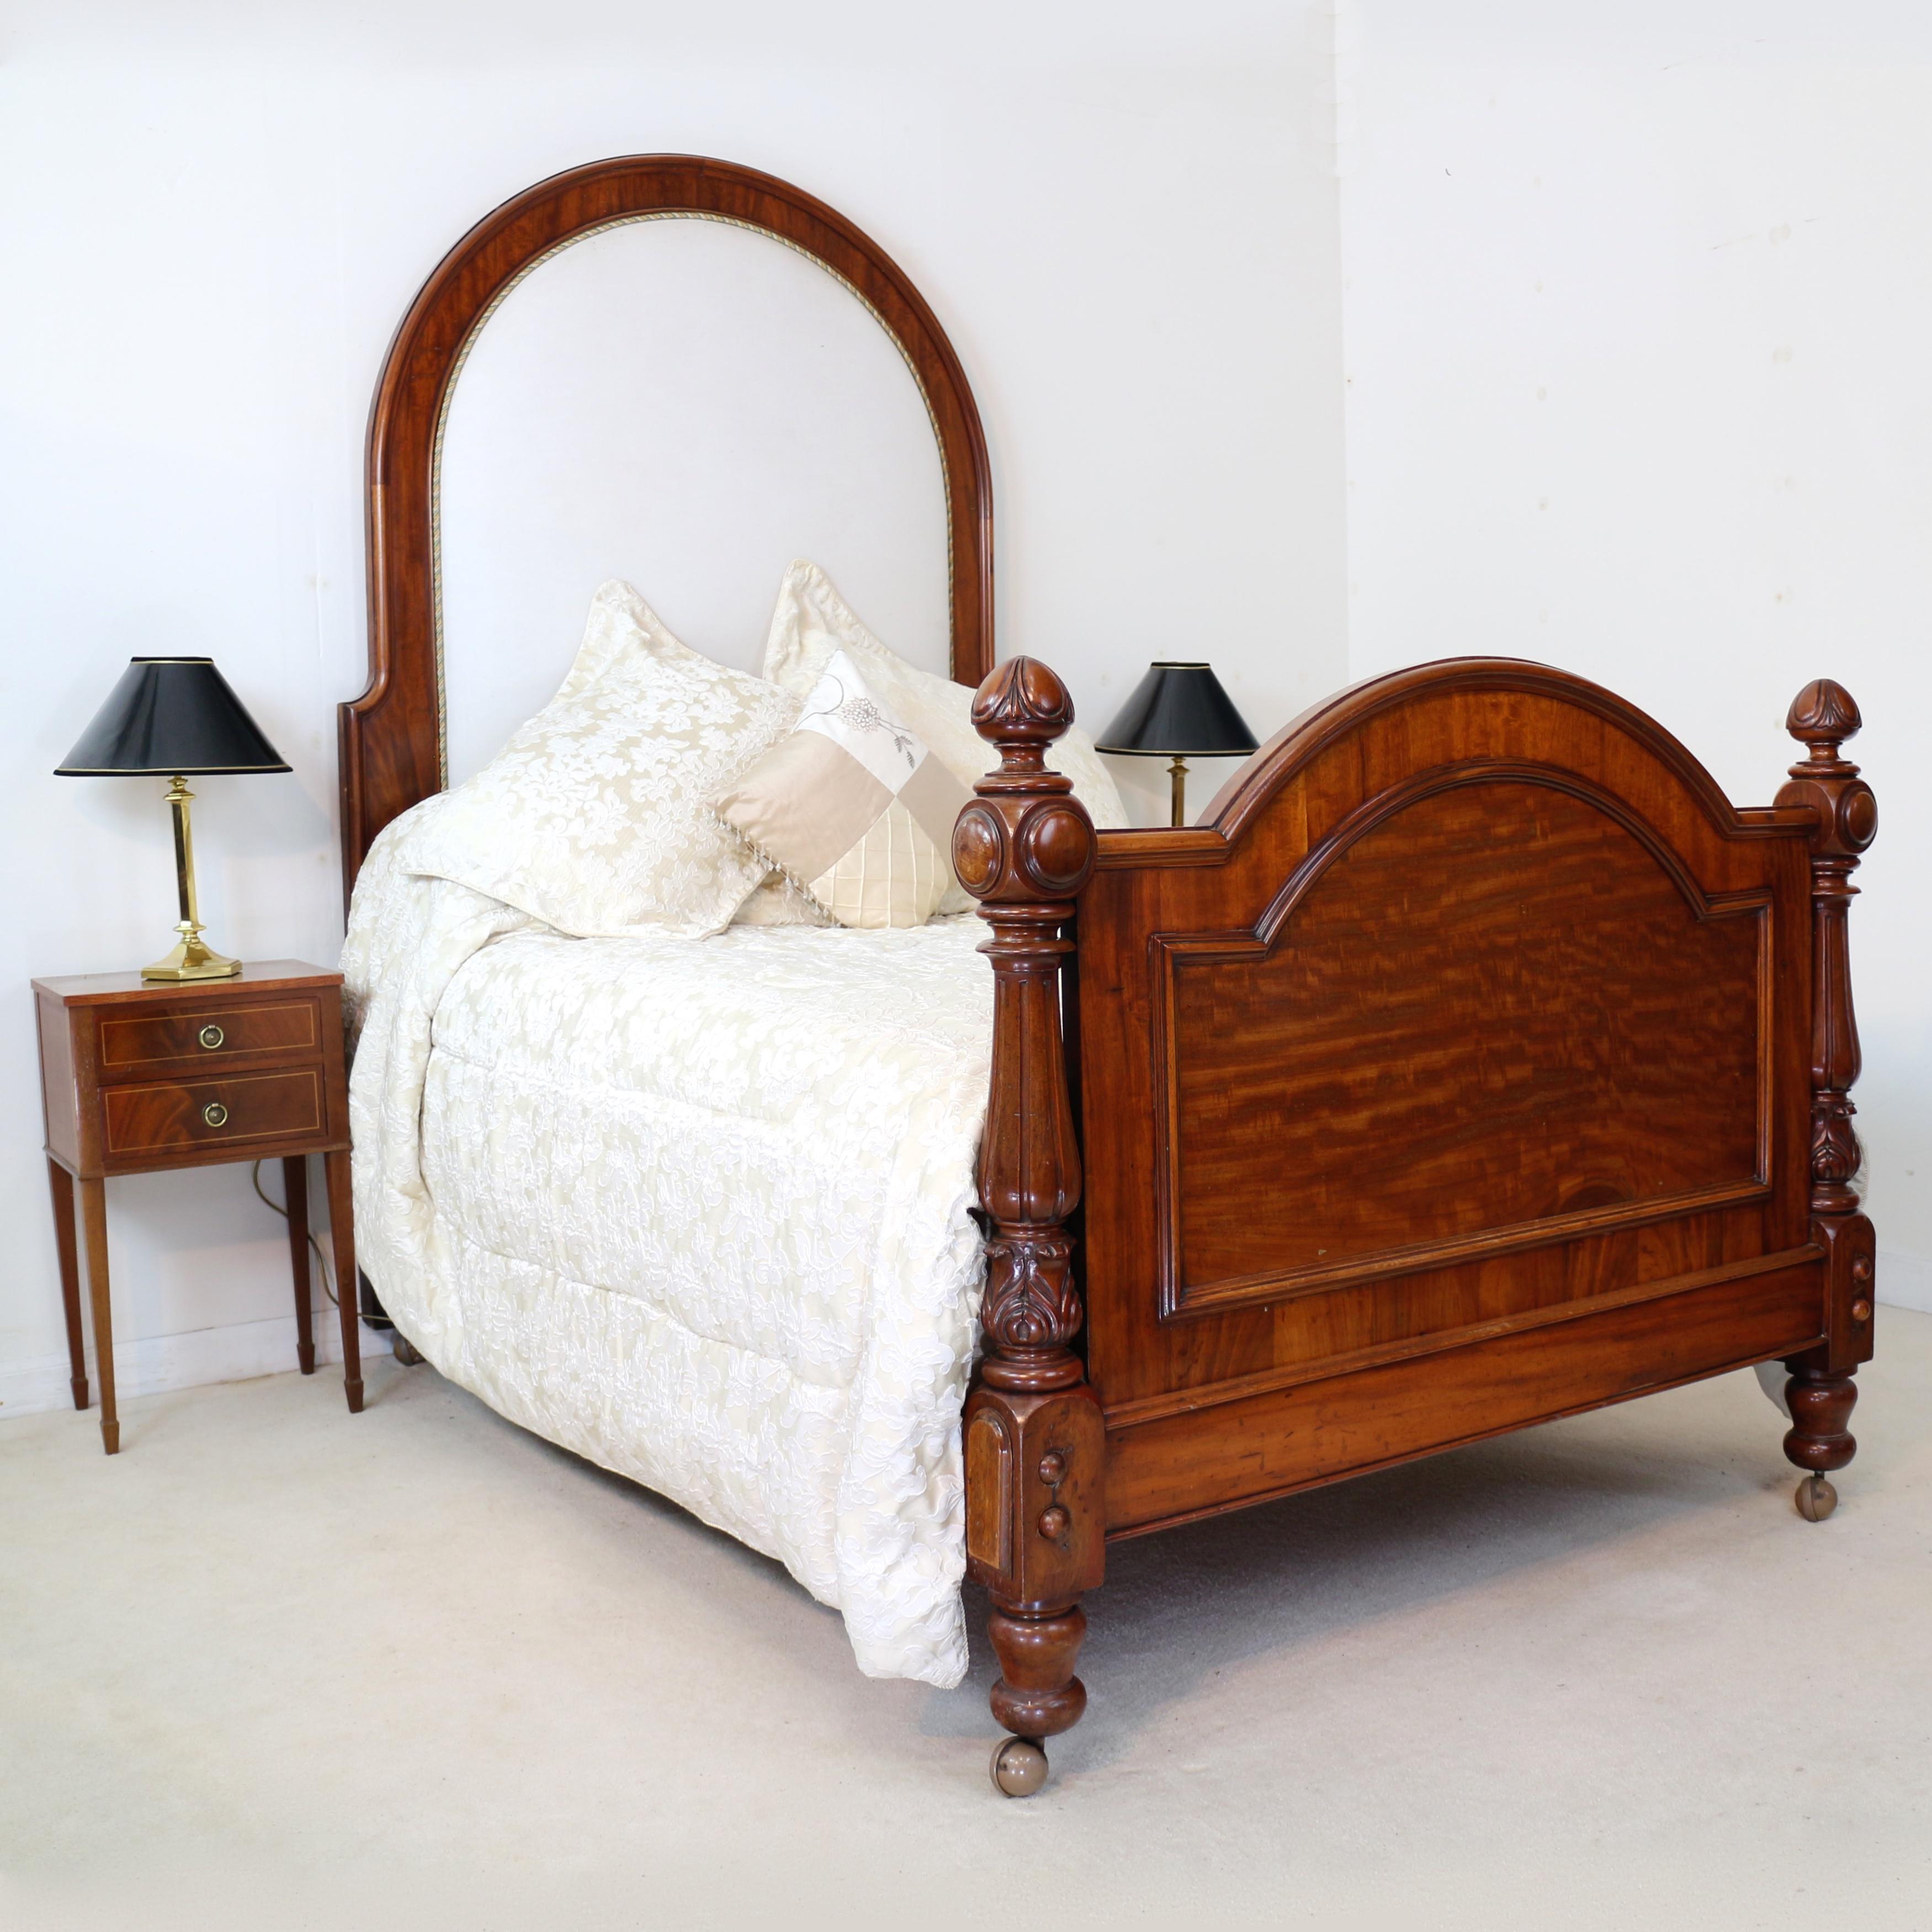 A handsome Victorian mahogany and upholstered double bed dating to circa 1880. With a tall half tester size arched padded and upholstered headboard and two acanthus carved and fluted columns flanking the moulded panelled upholstered footboard, it